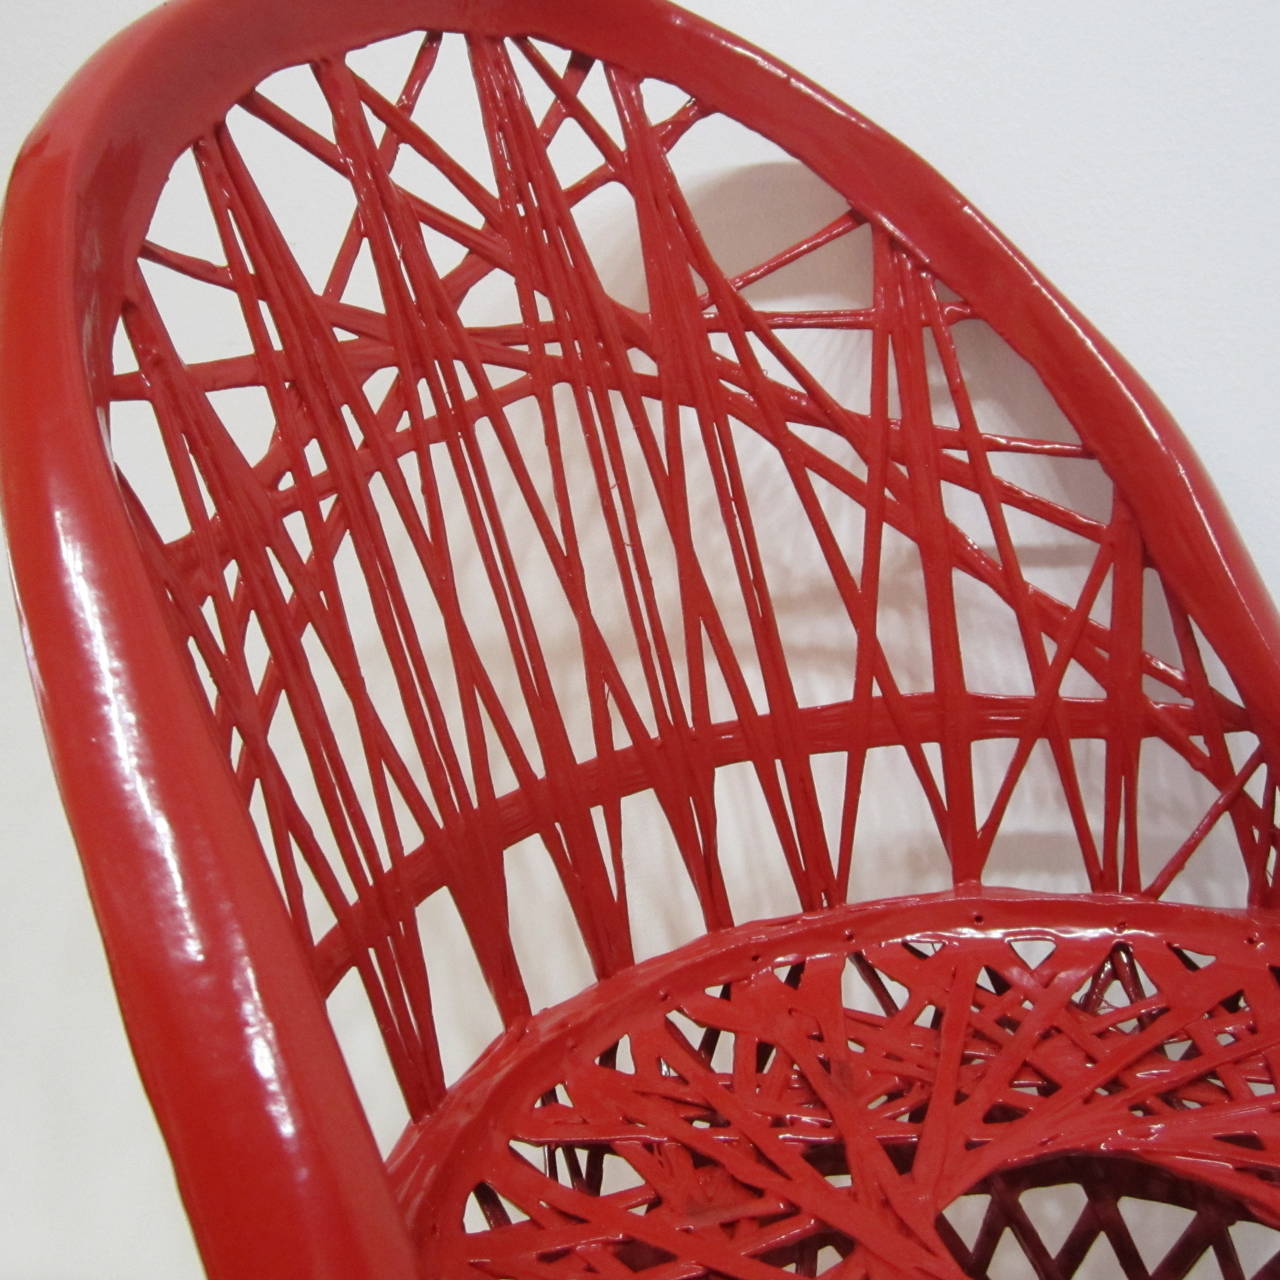 Spun Aluminum Childs Chair in Rich Fire Engine Red 1